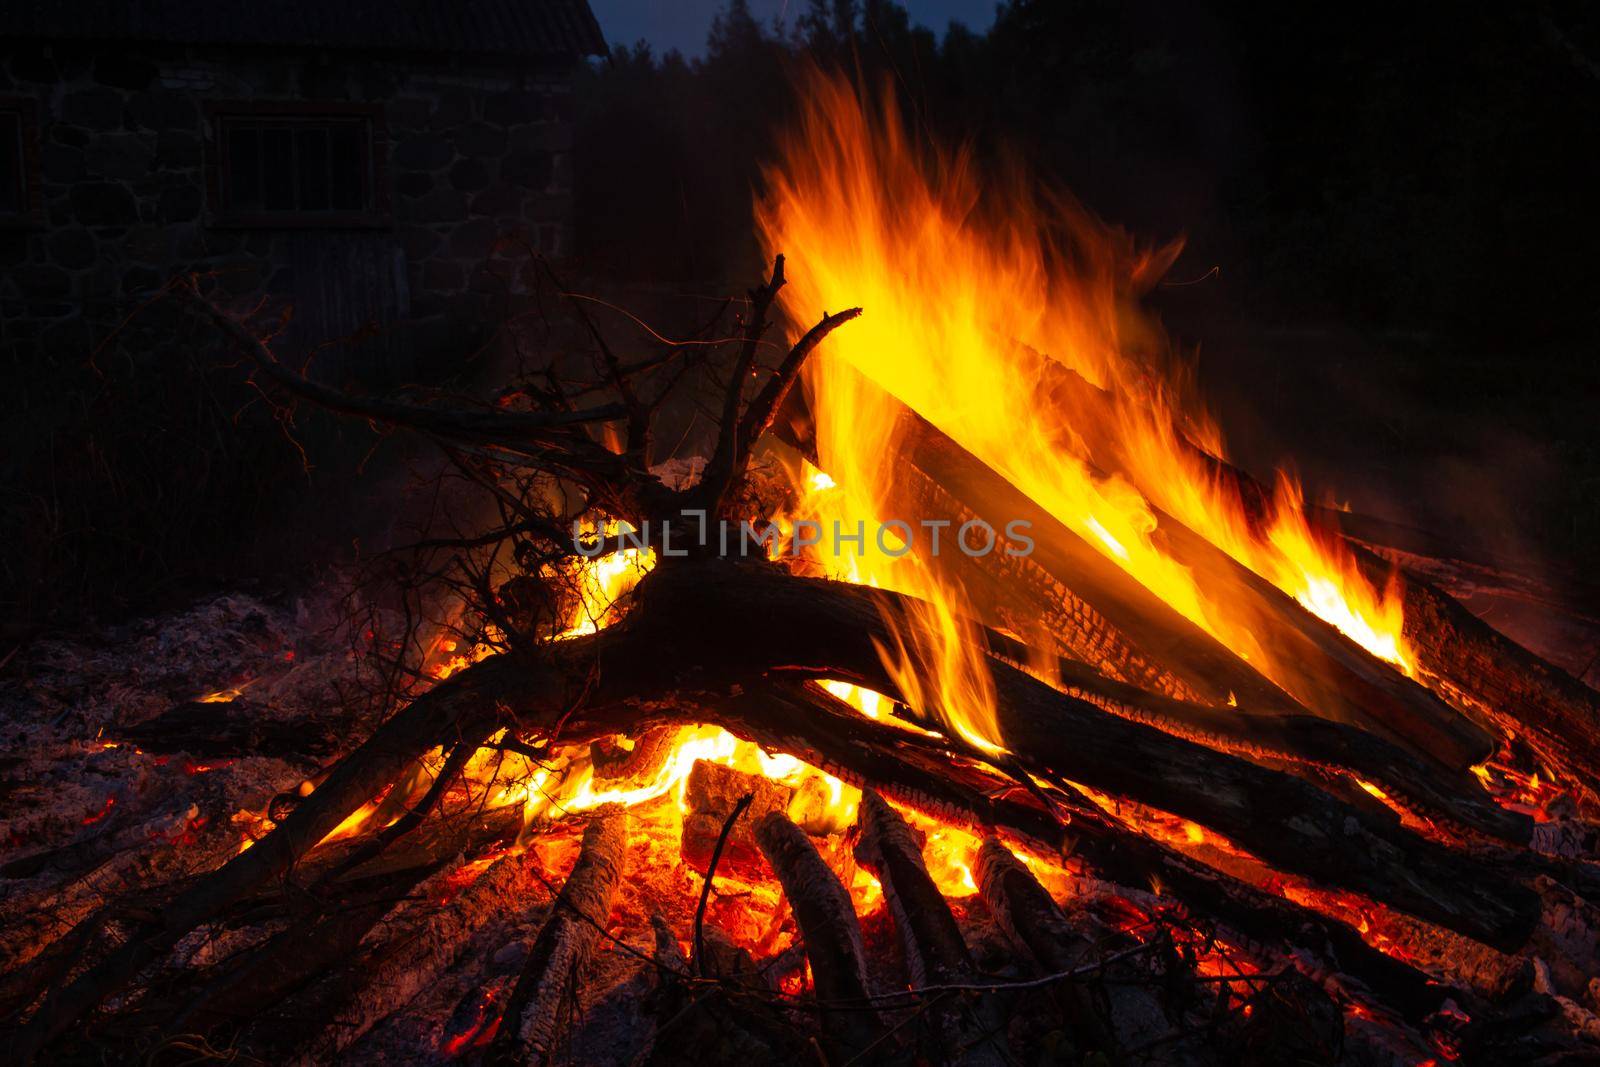 Fire place traditional symbol in Latvia midsummer festival by scudrinja